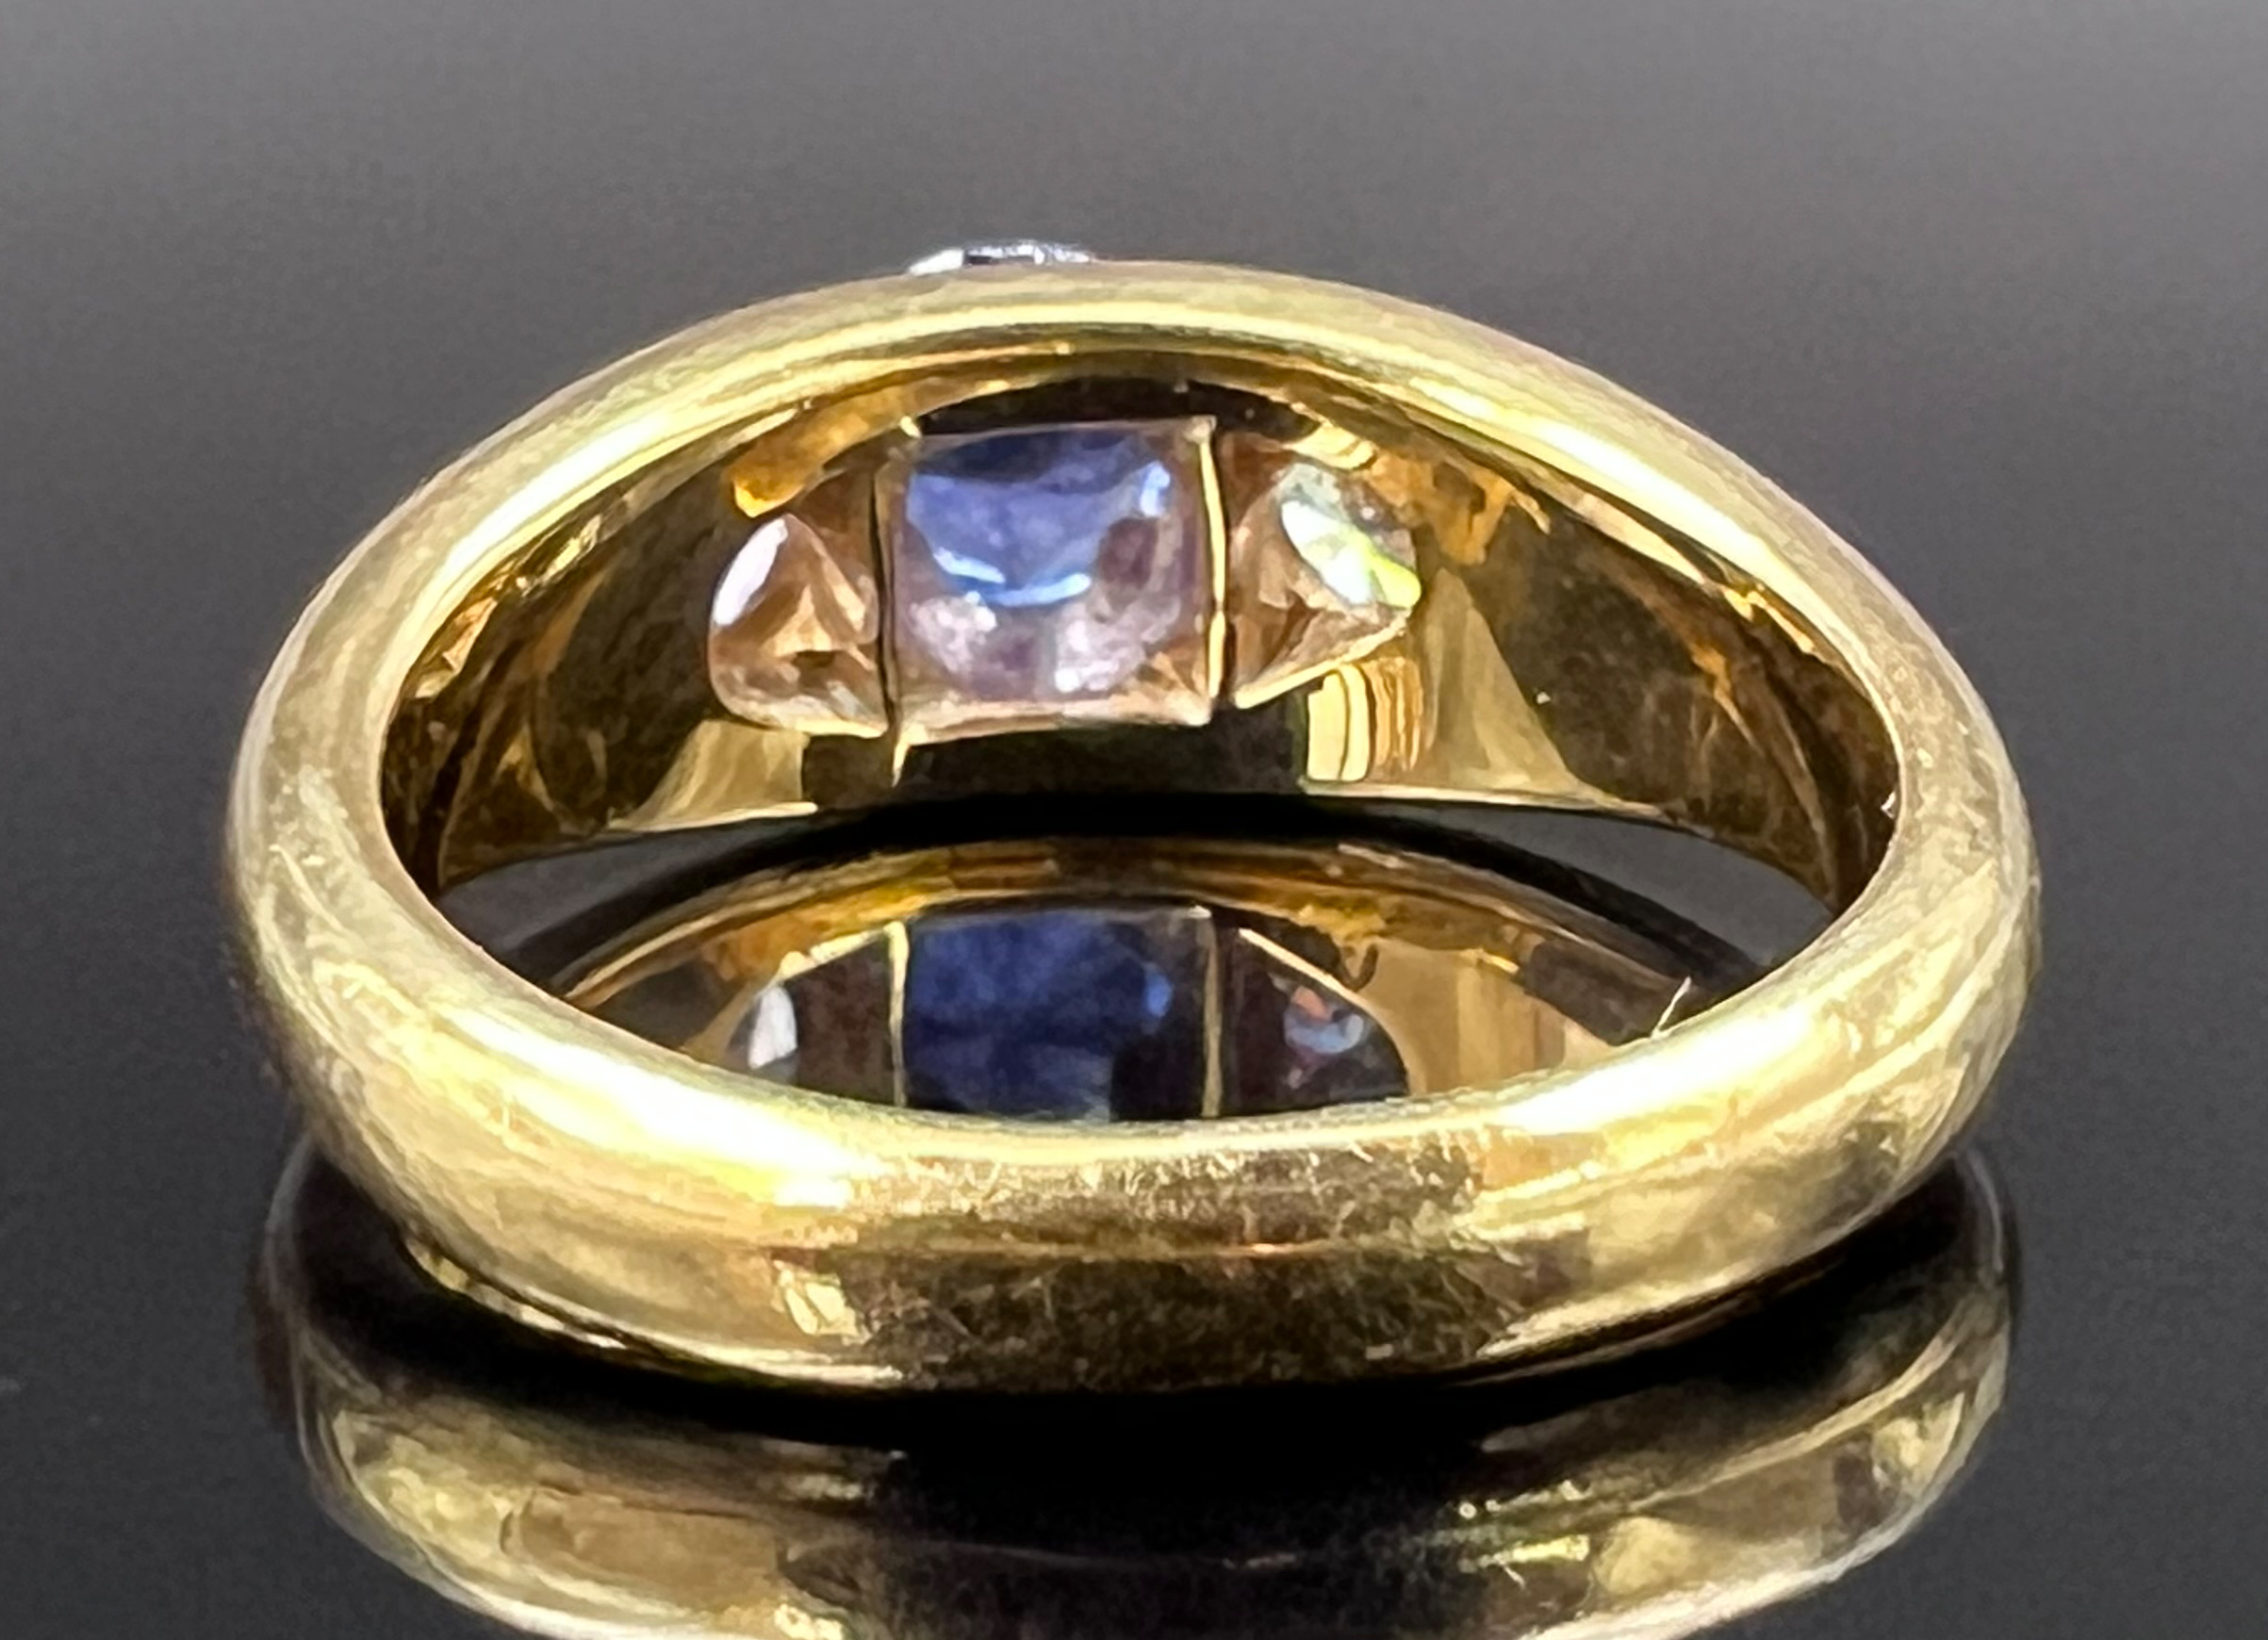 Ladies' ring. 750 yellow gold with 2 diamonds and a blue coloured stone. - Image 2 of 10